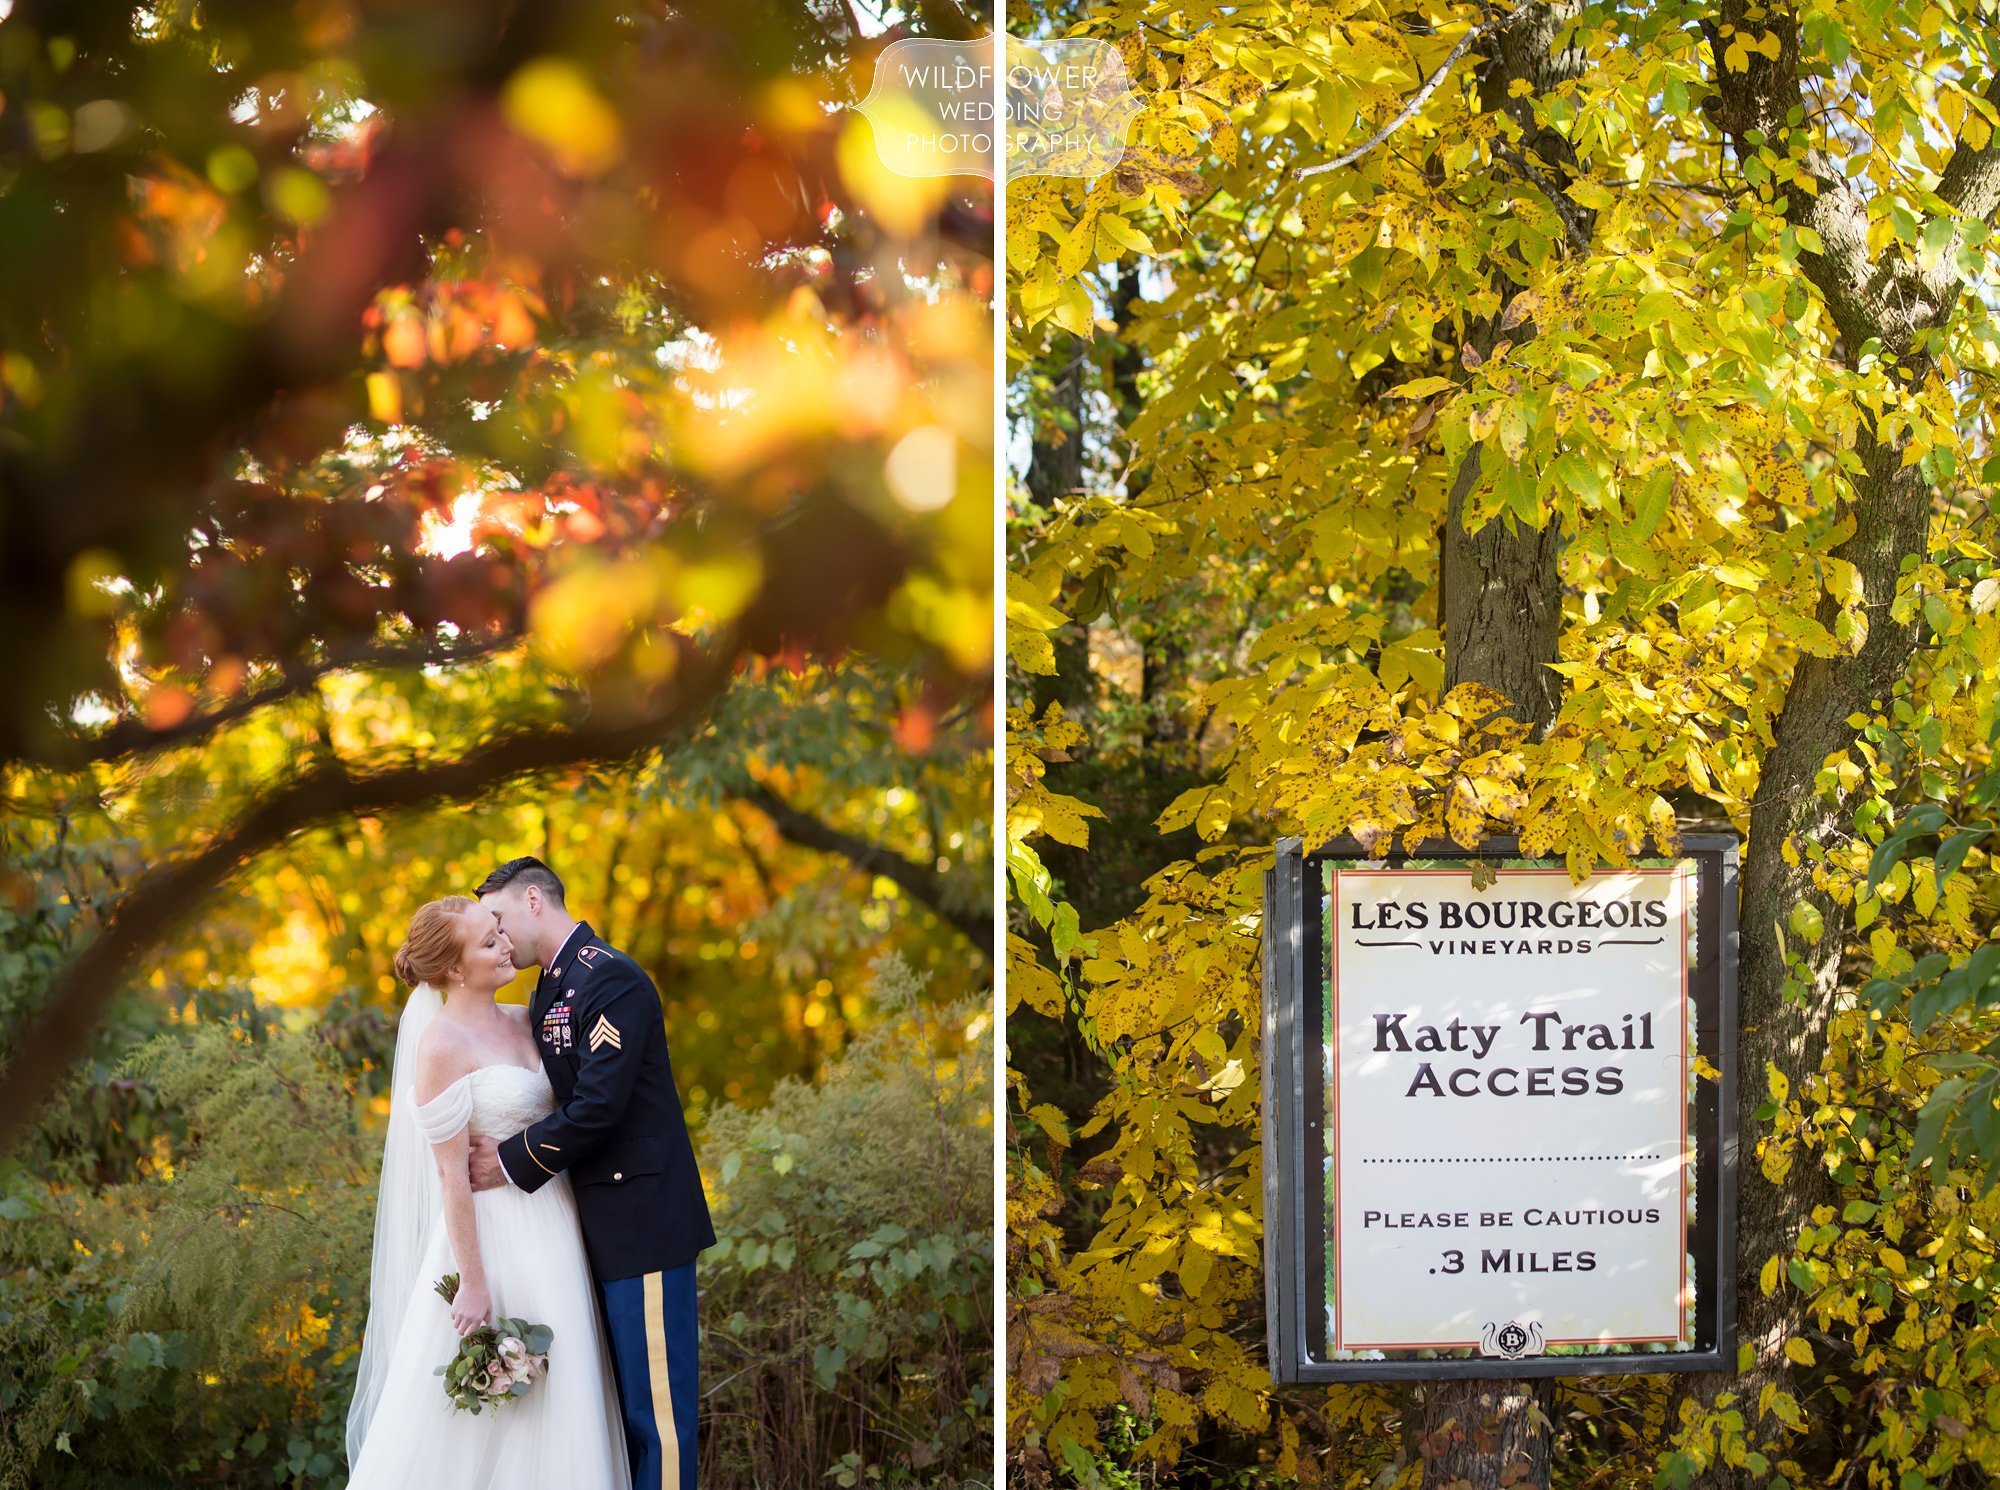 Fall wedding portraits of the bride and groom along the Katy Trail at Les Bourgeois.